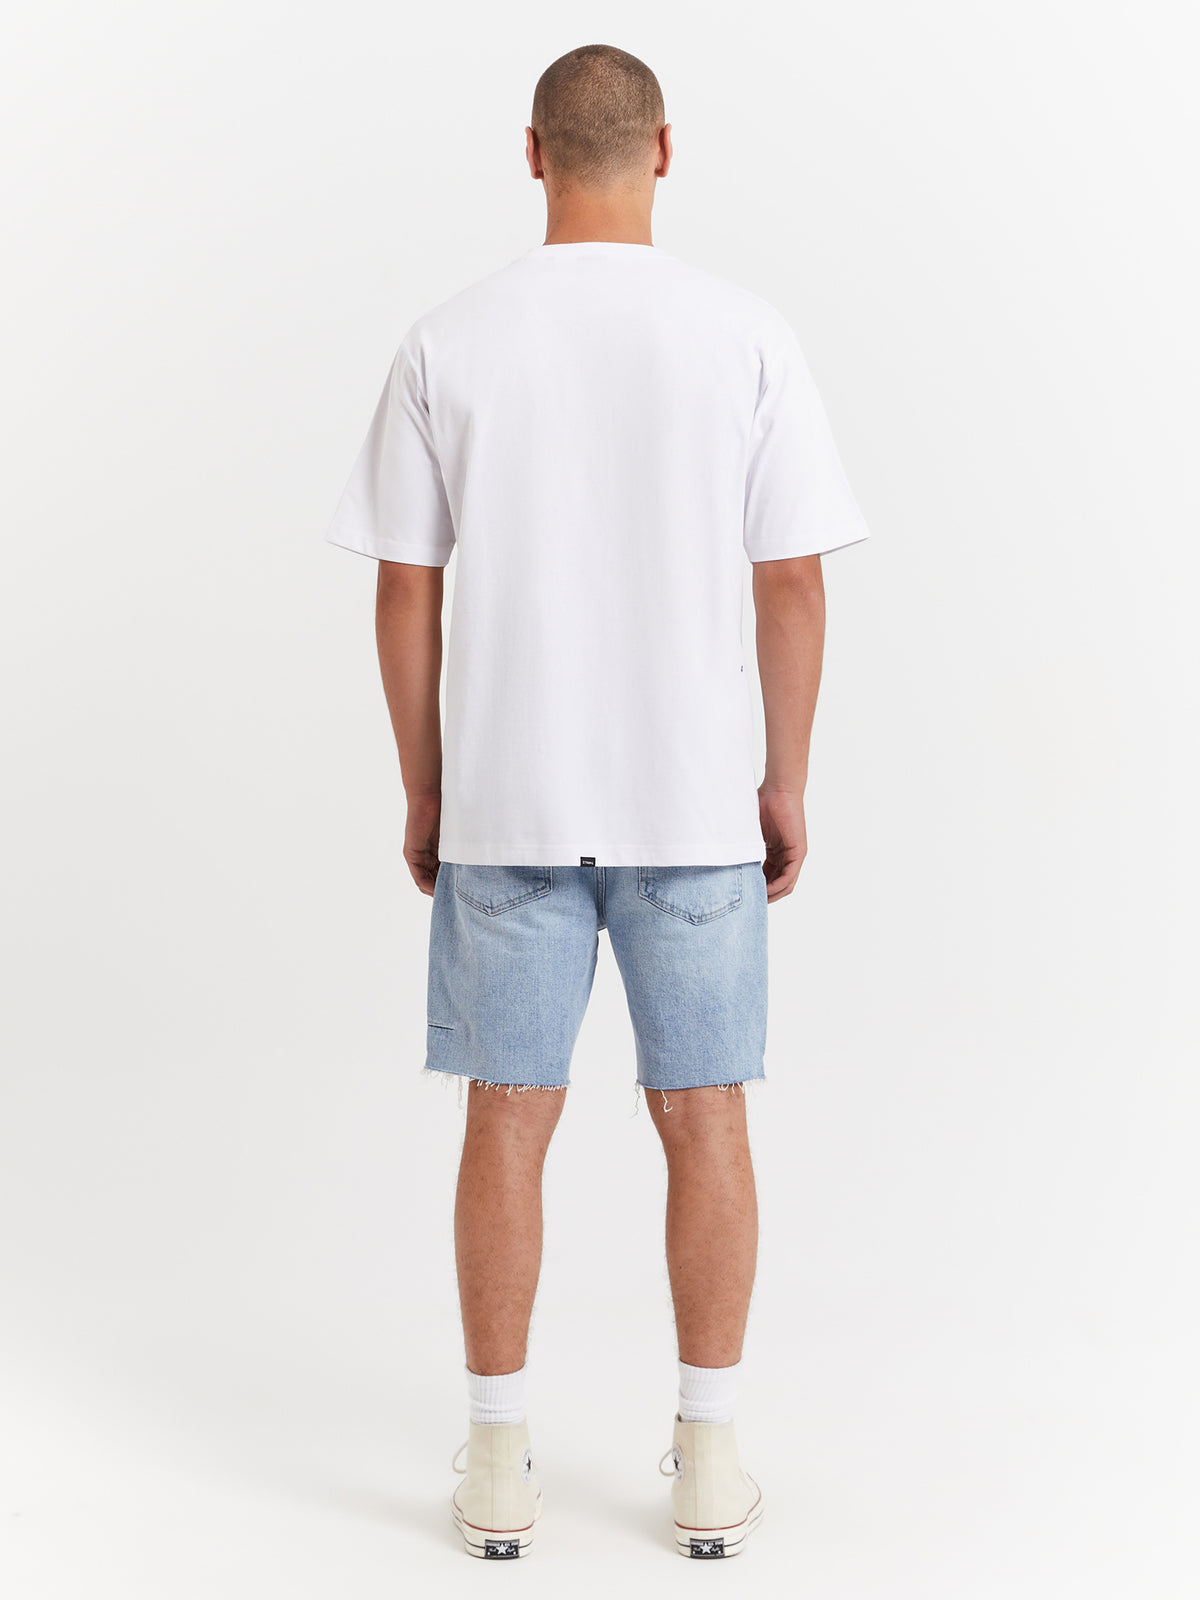 In Harmony Oversize Fit T-Shirt in White